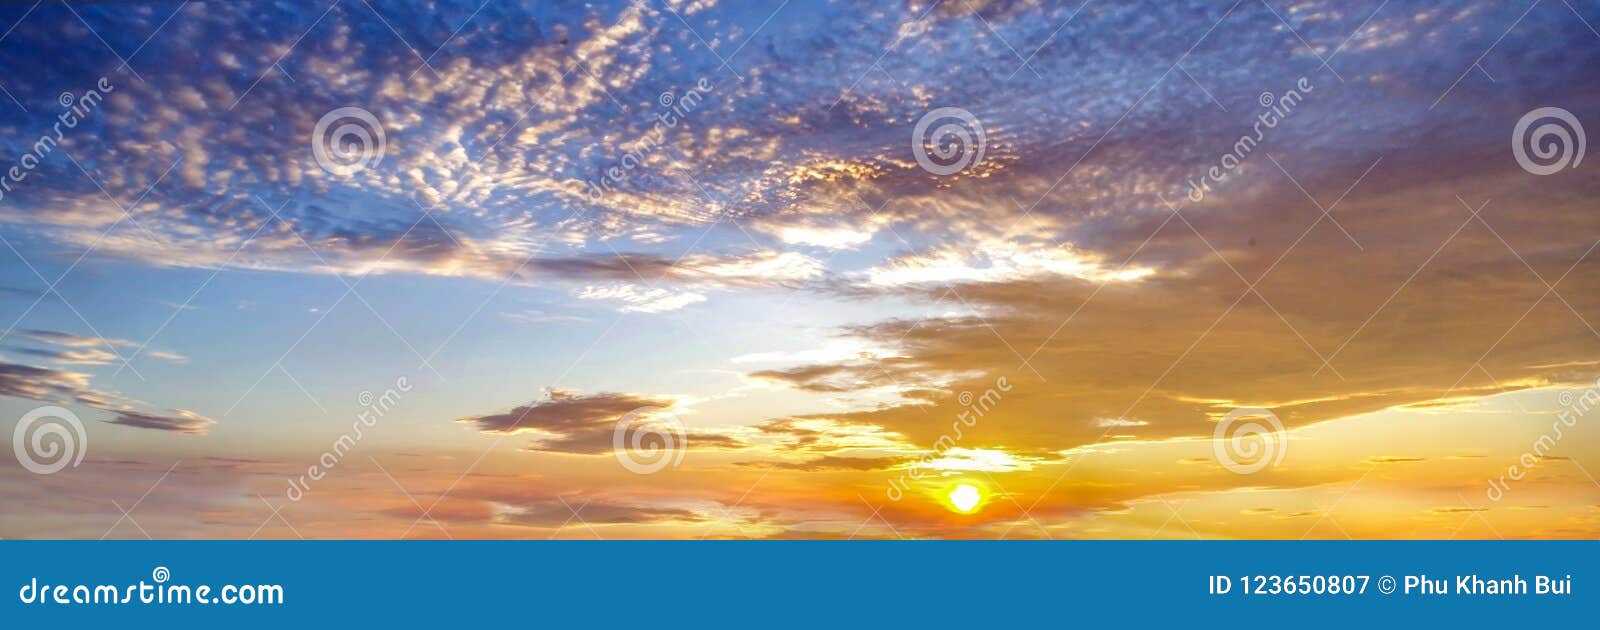 Background with Magic of the Clouds and the Sky at the Dawn, Sunrise, Sunset  Part 12 Stock Image - Image of dramatic, dawn: 123650807